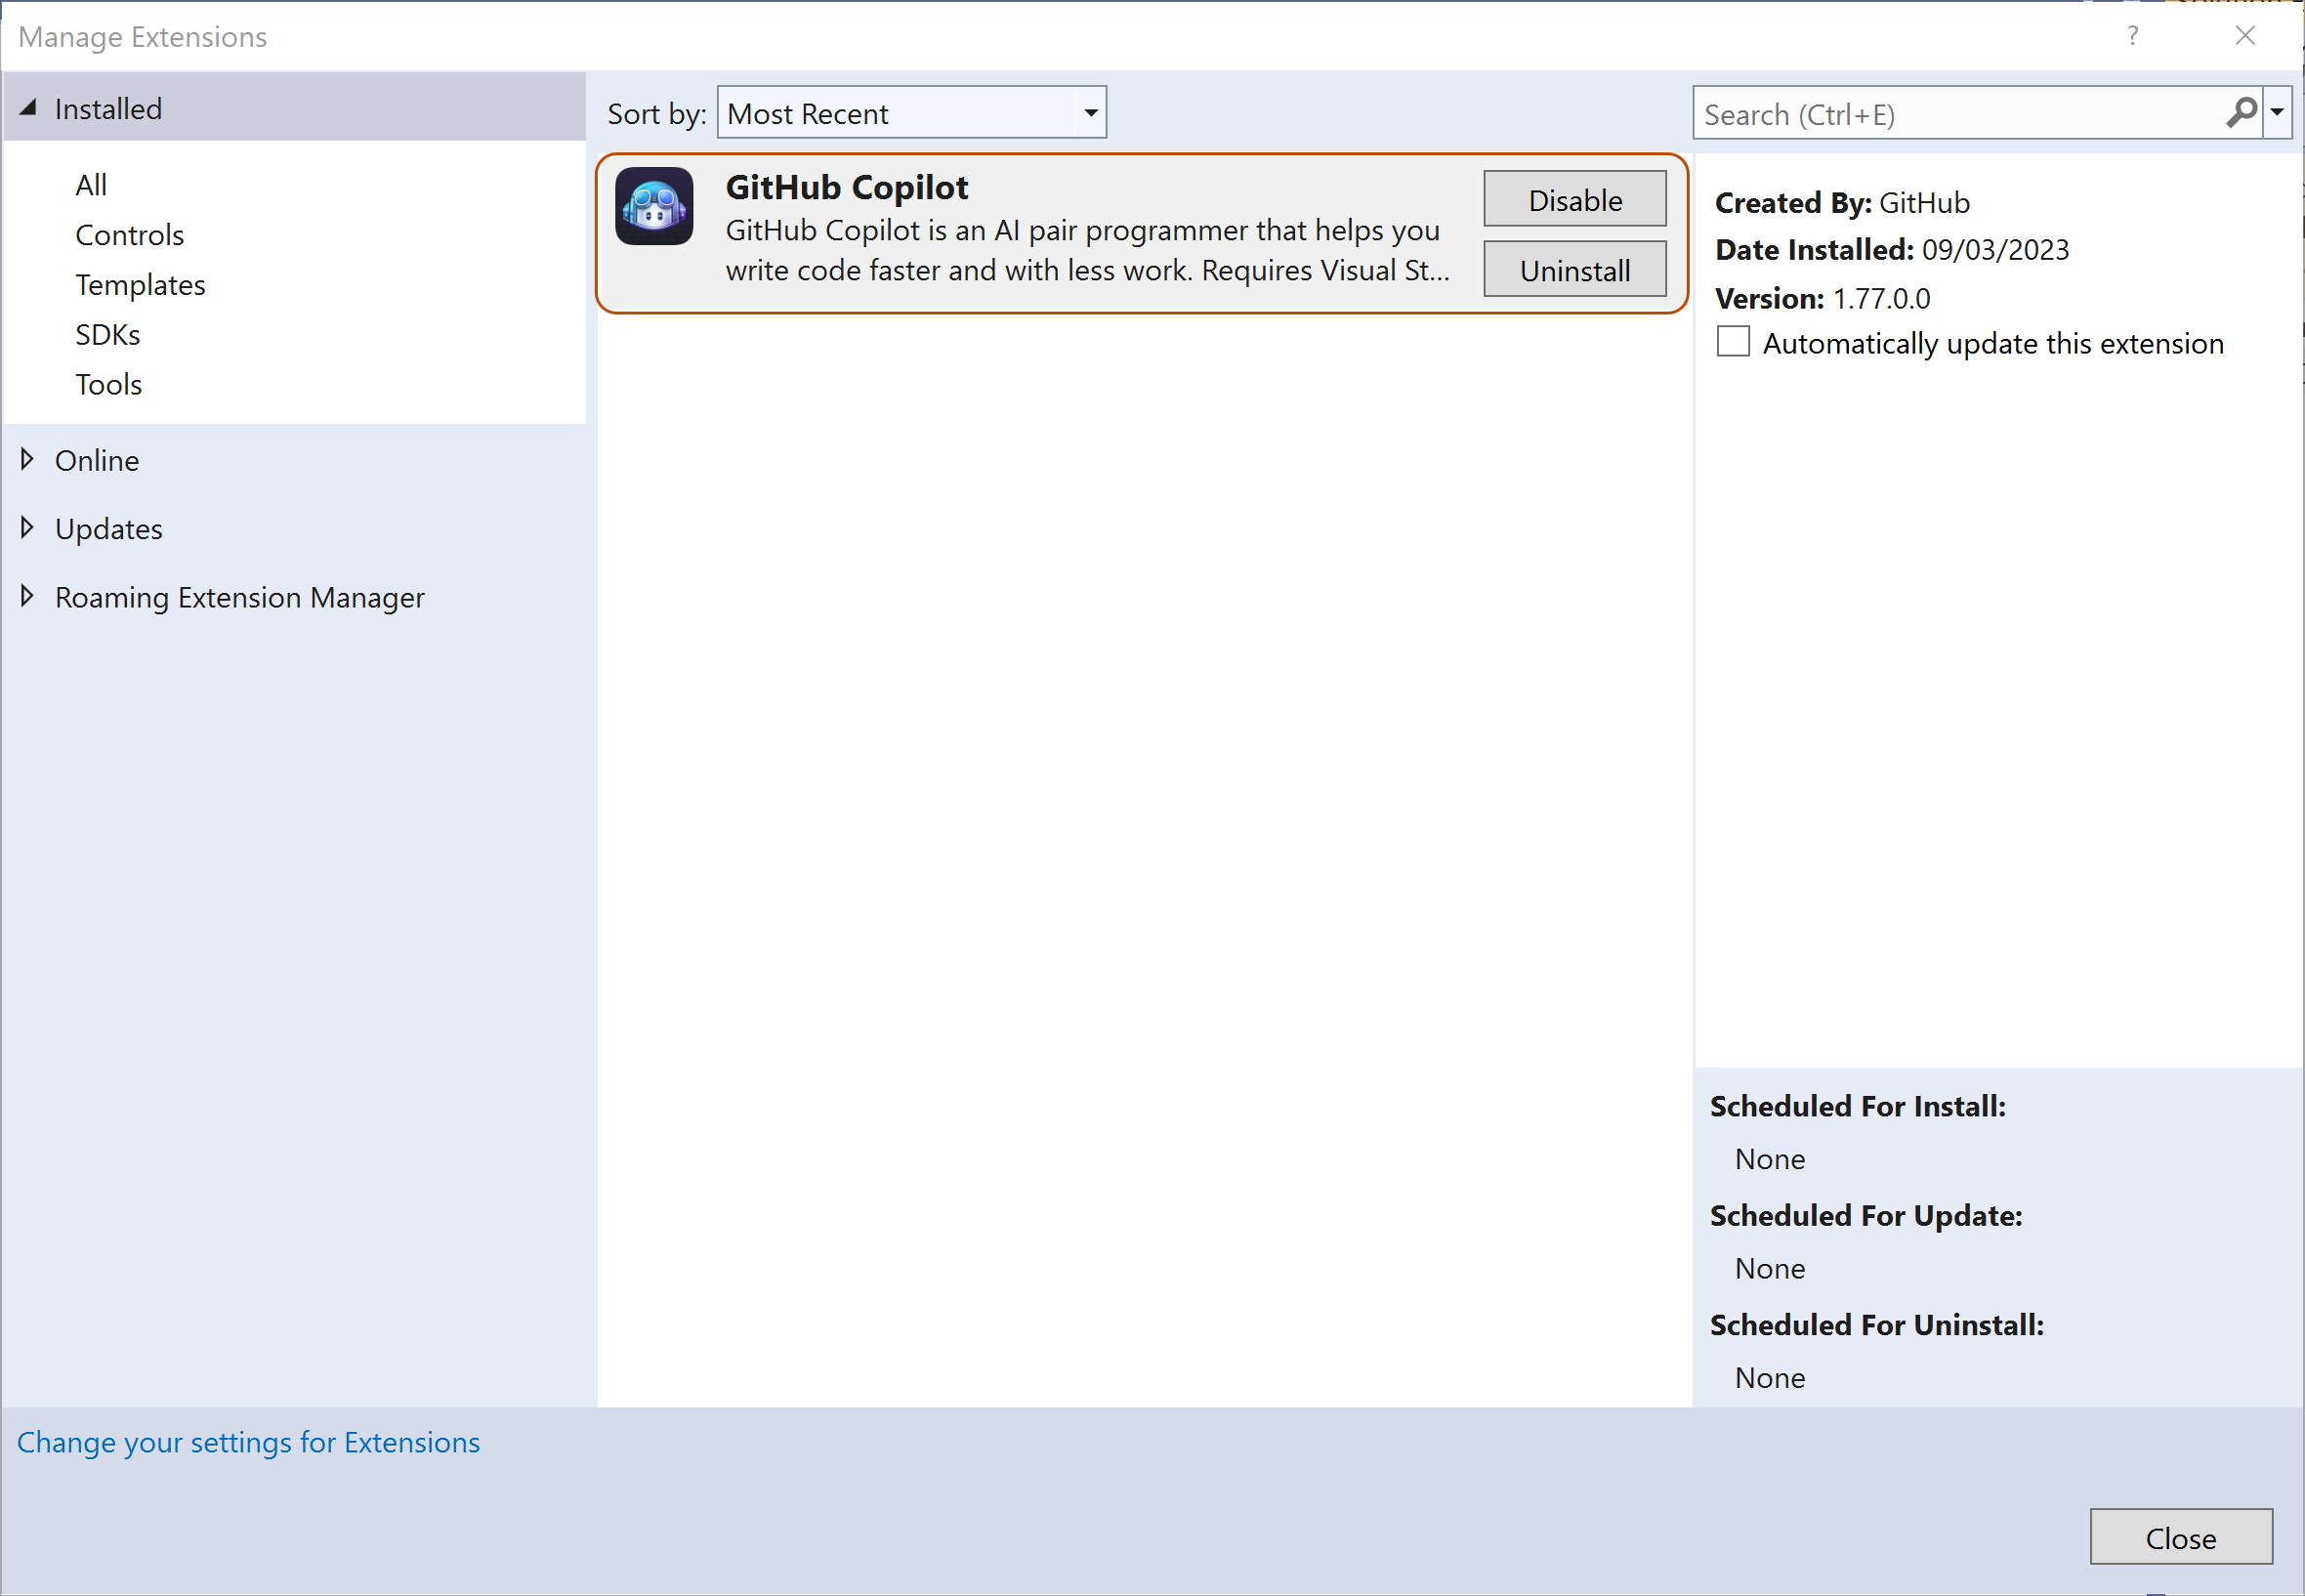 Screenshot of installed extensions in Visual Studio with GitHub Copilot emphasized